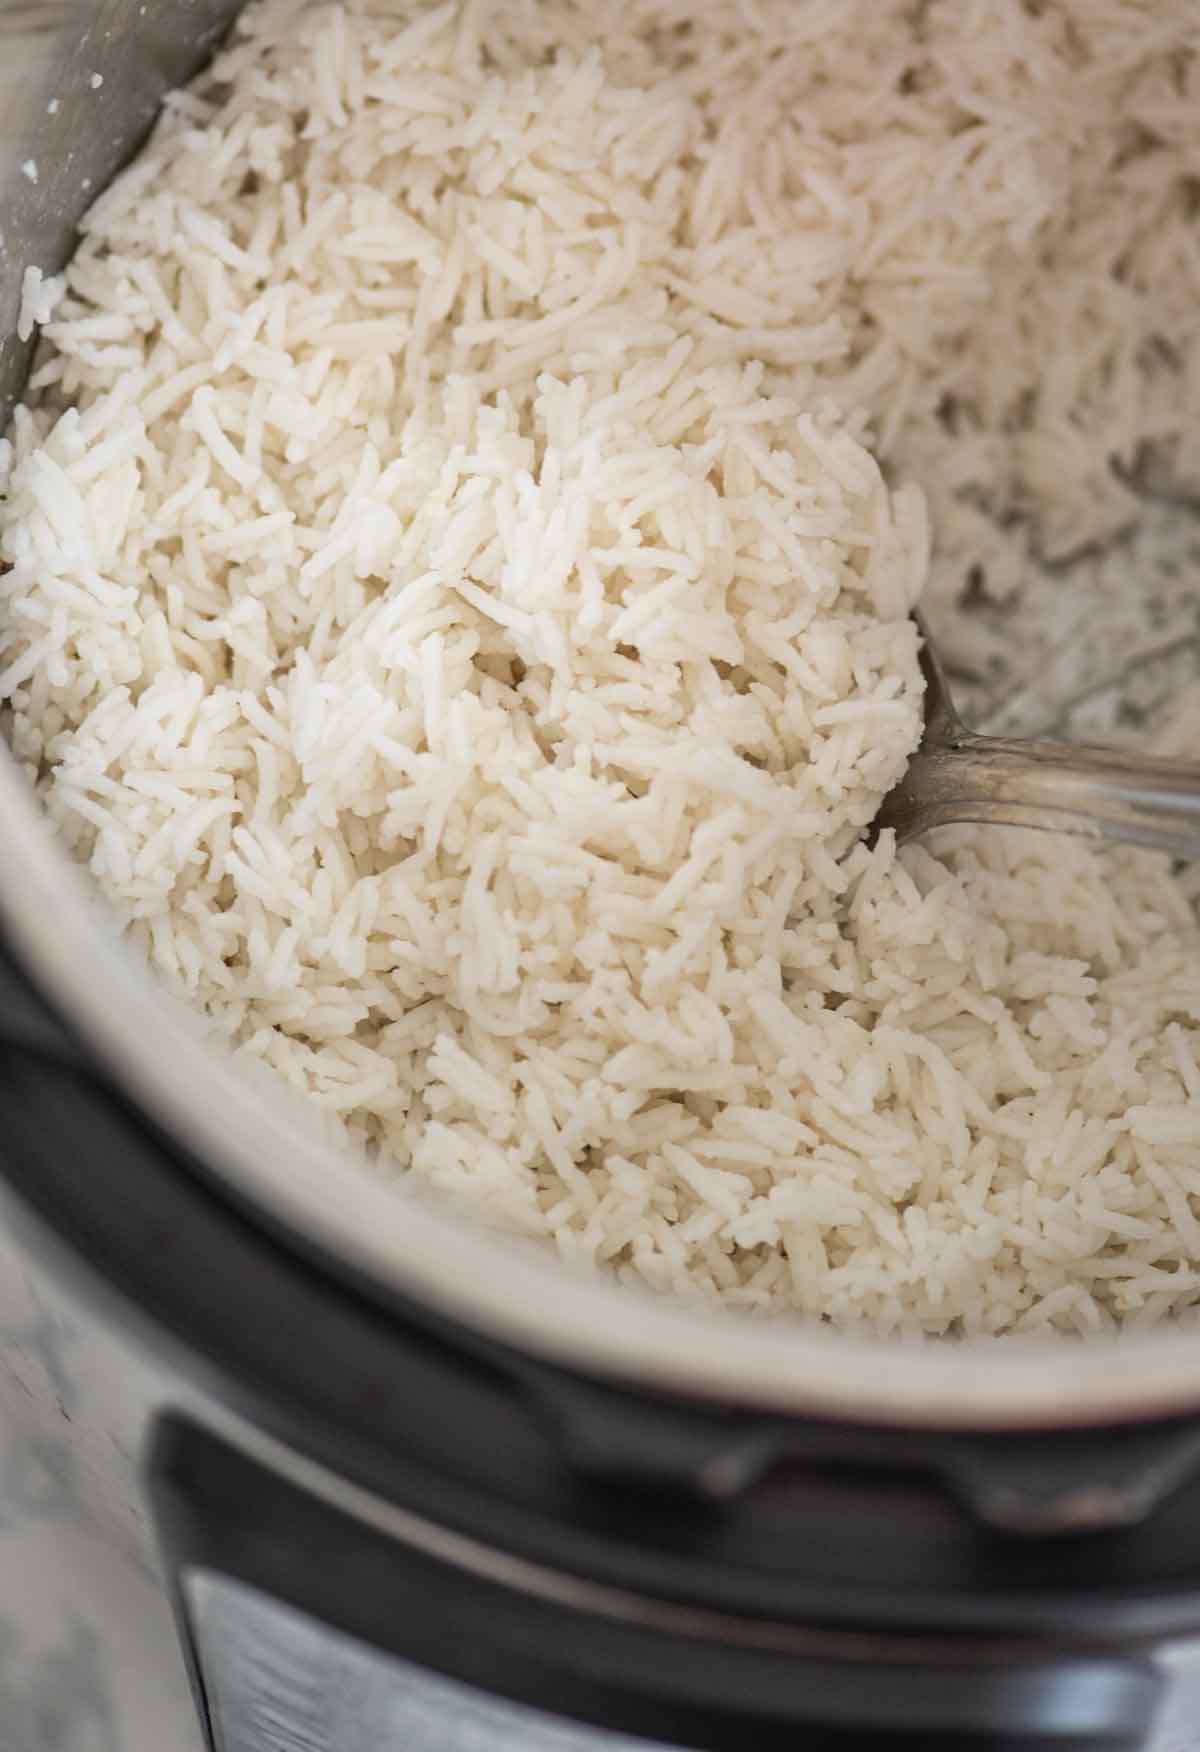 Basmati rice cooked in the Instant Pot